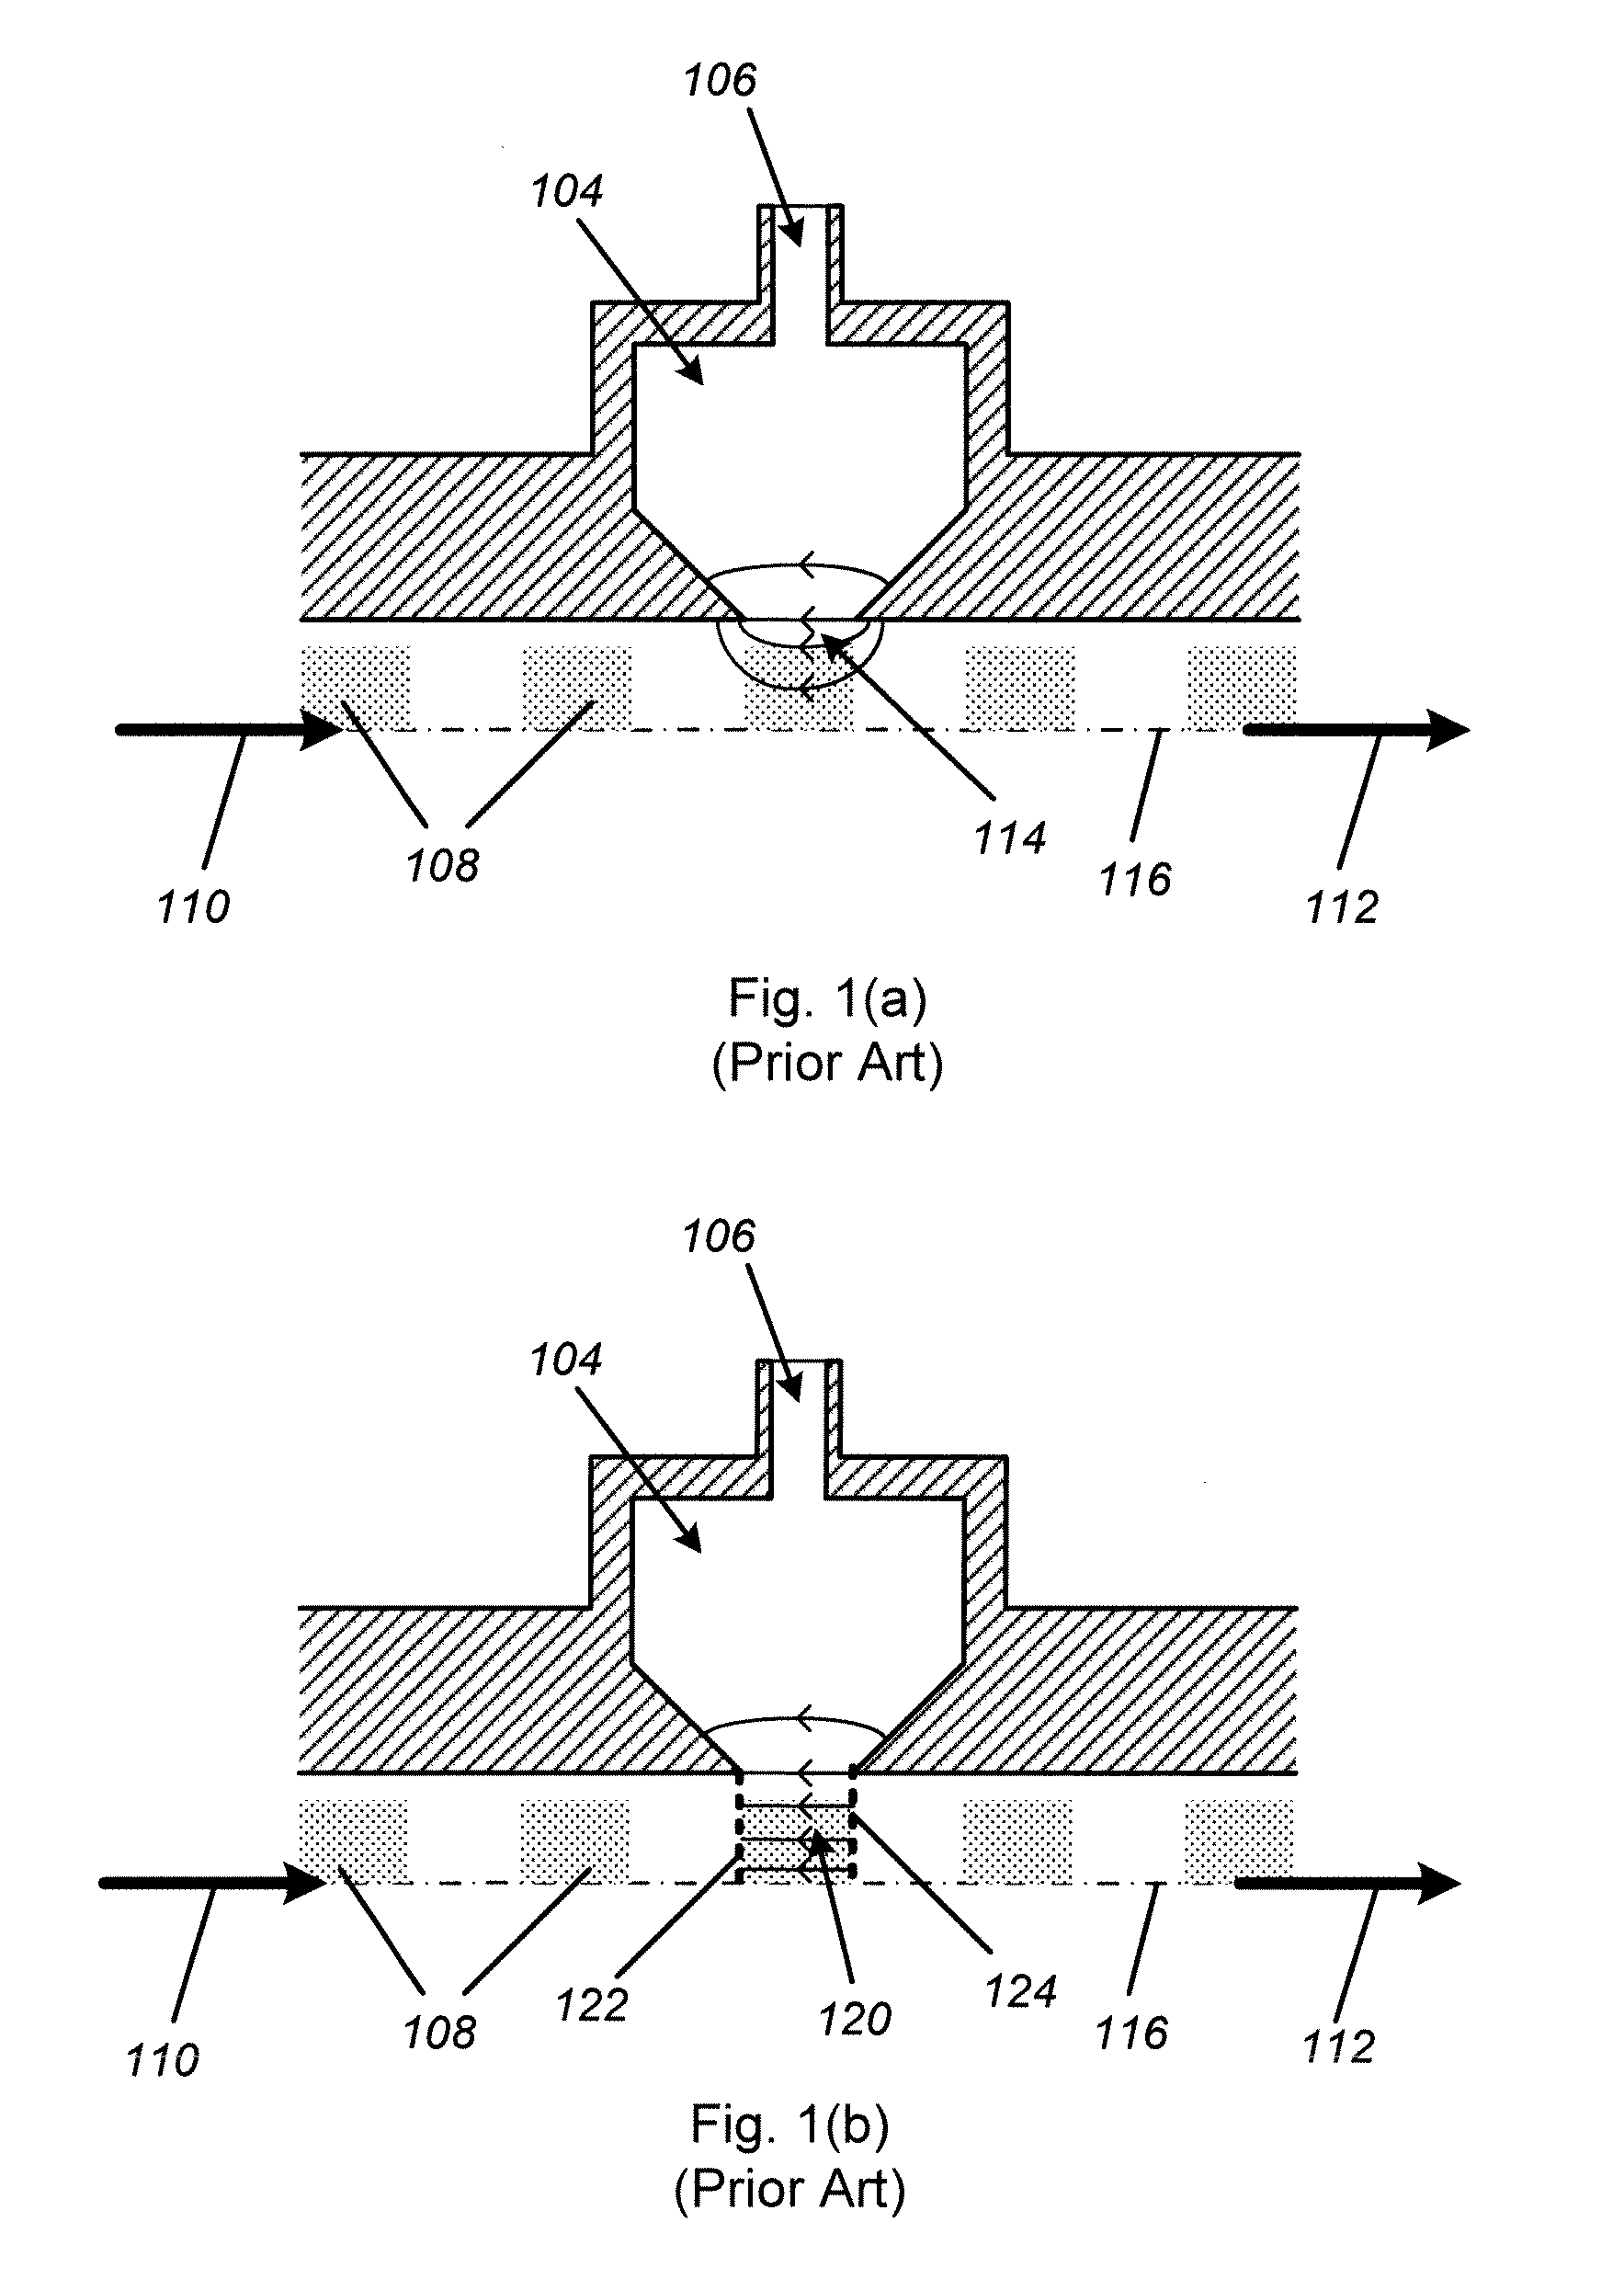 Overmoded distributed interaction network